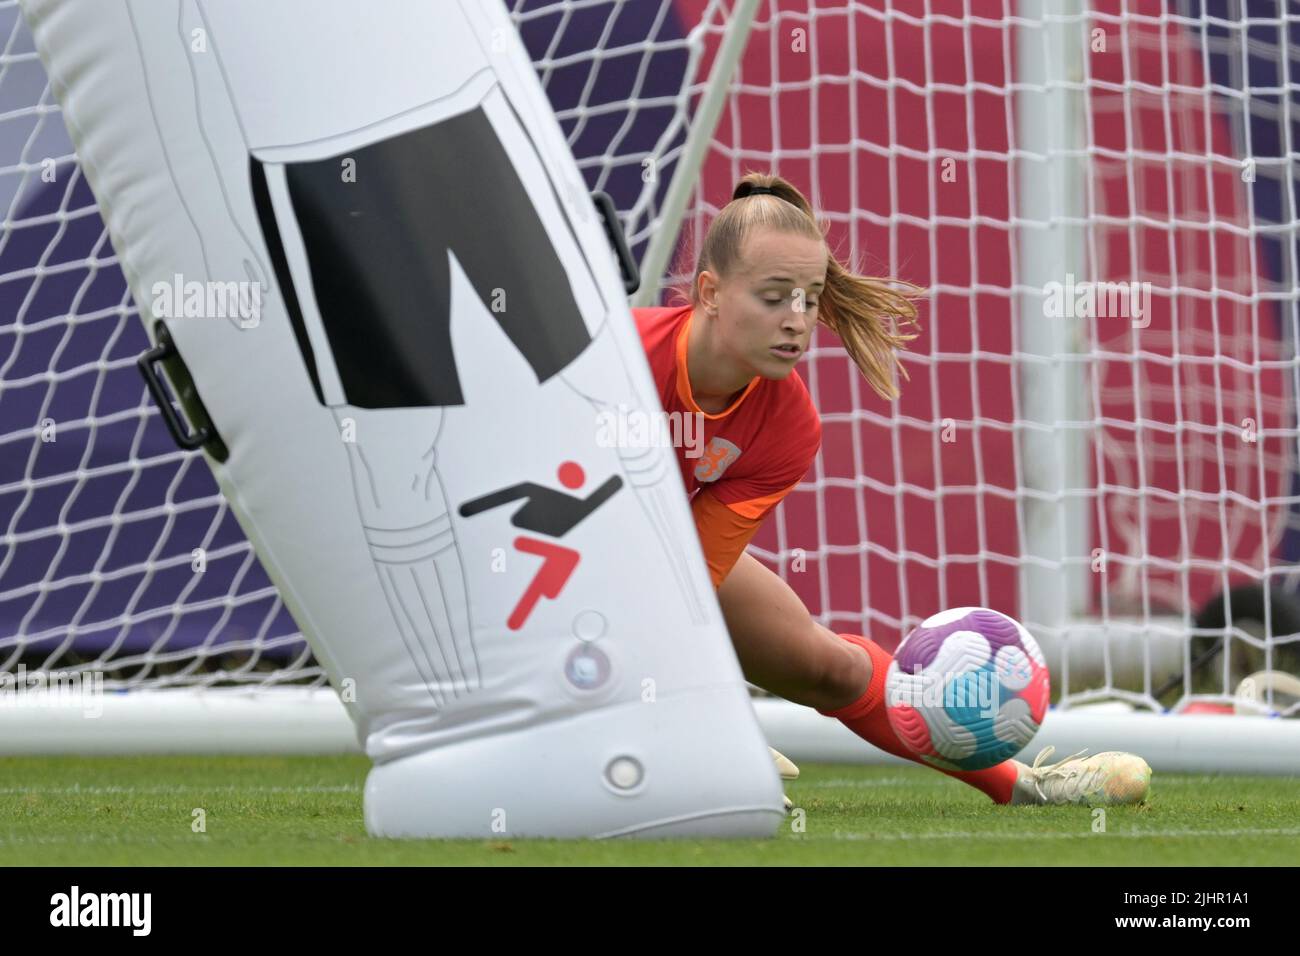 STOCKPORT - UK, 20/07/2022, Holland women goalkeeper Daphne van Domselaar during a training session for the Netherlands women's national team on July 20, 2022 at Stockport County FC in Stockport prior to the UEFA Women's EURO England 2022 game against France. ANP GERRIT VAN COLOGNE Stock Photo